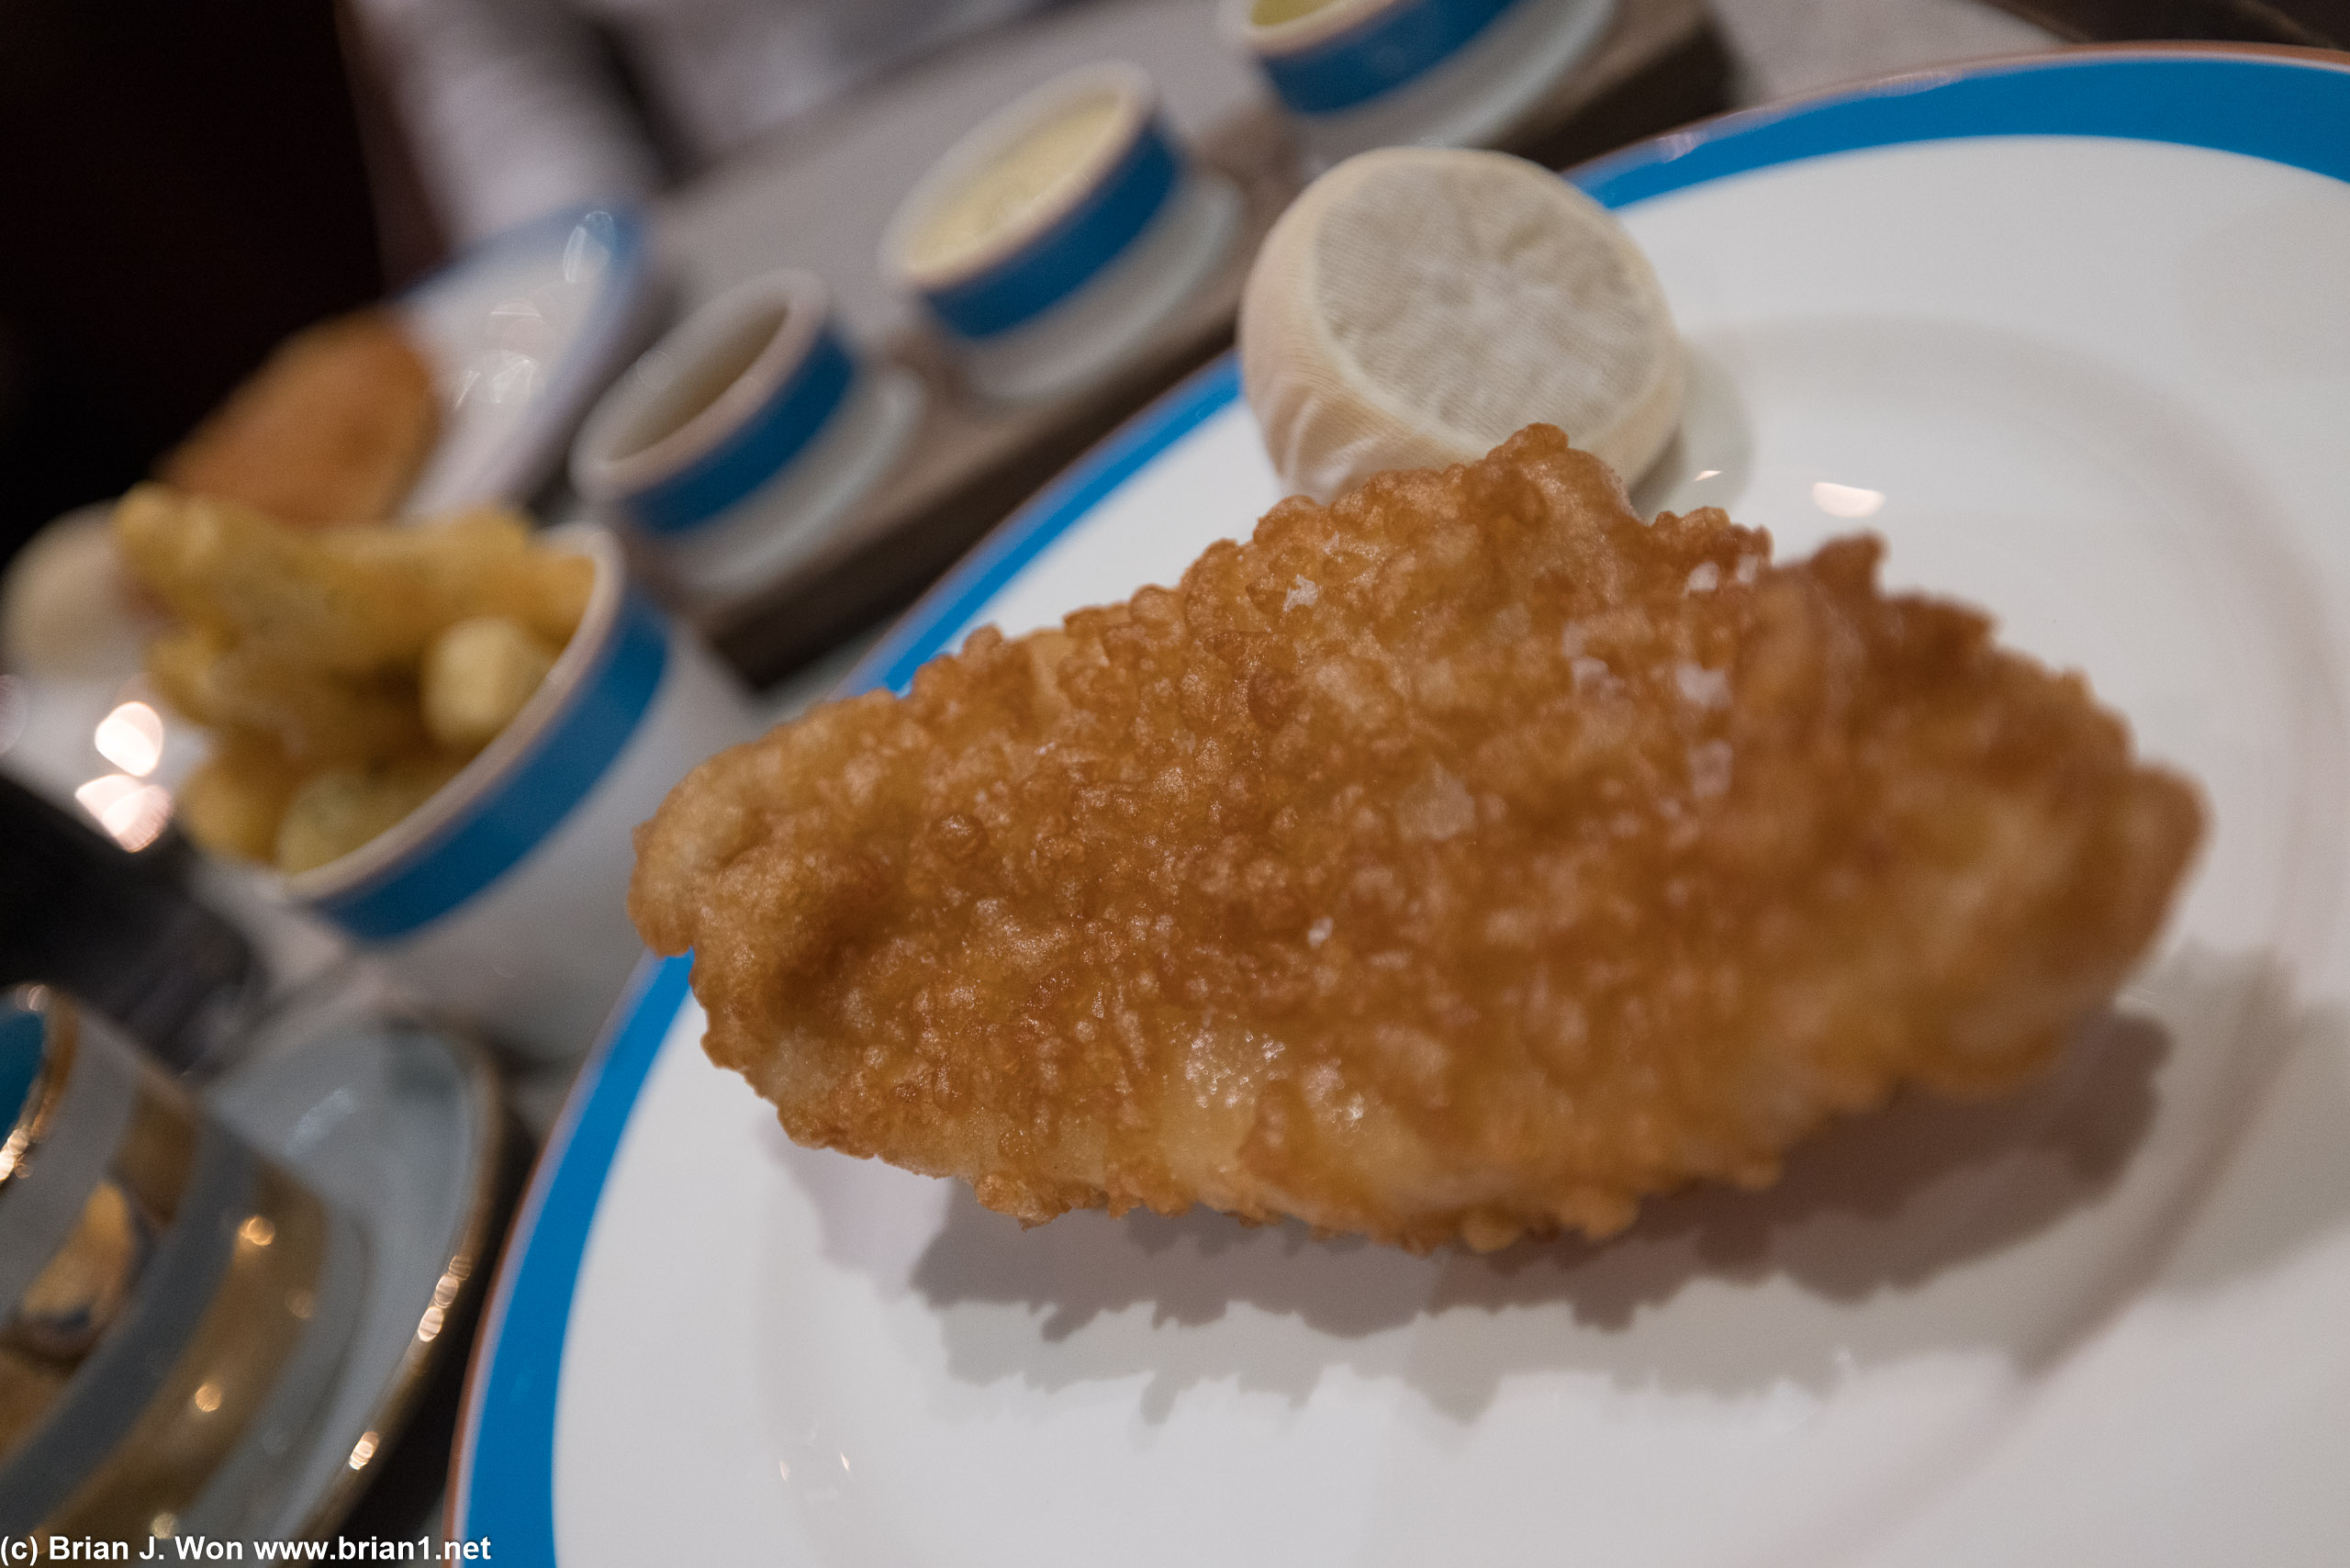 GBP46 fish and chips. Sole, not cod. So crispy you could hear it crackle.